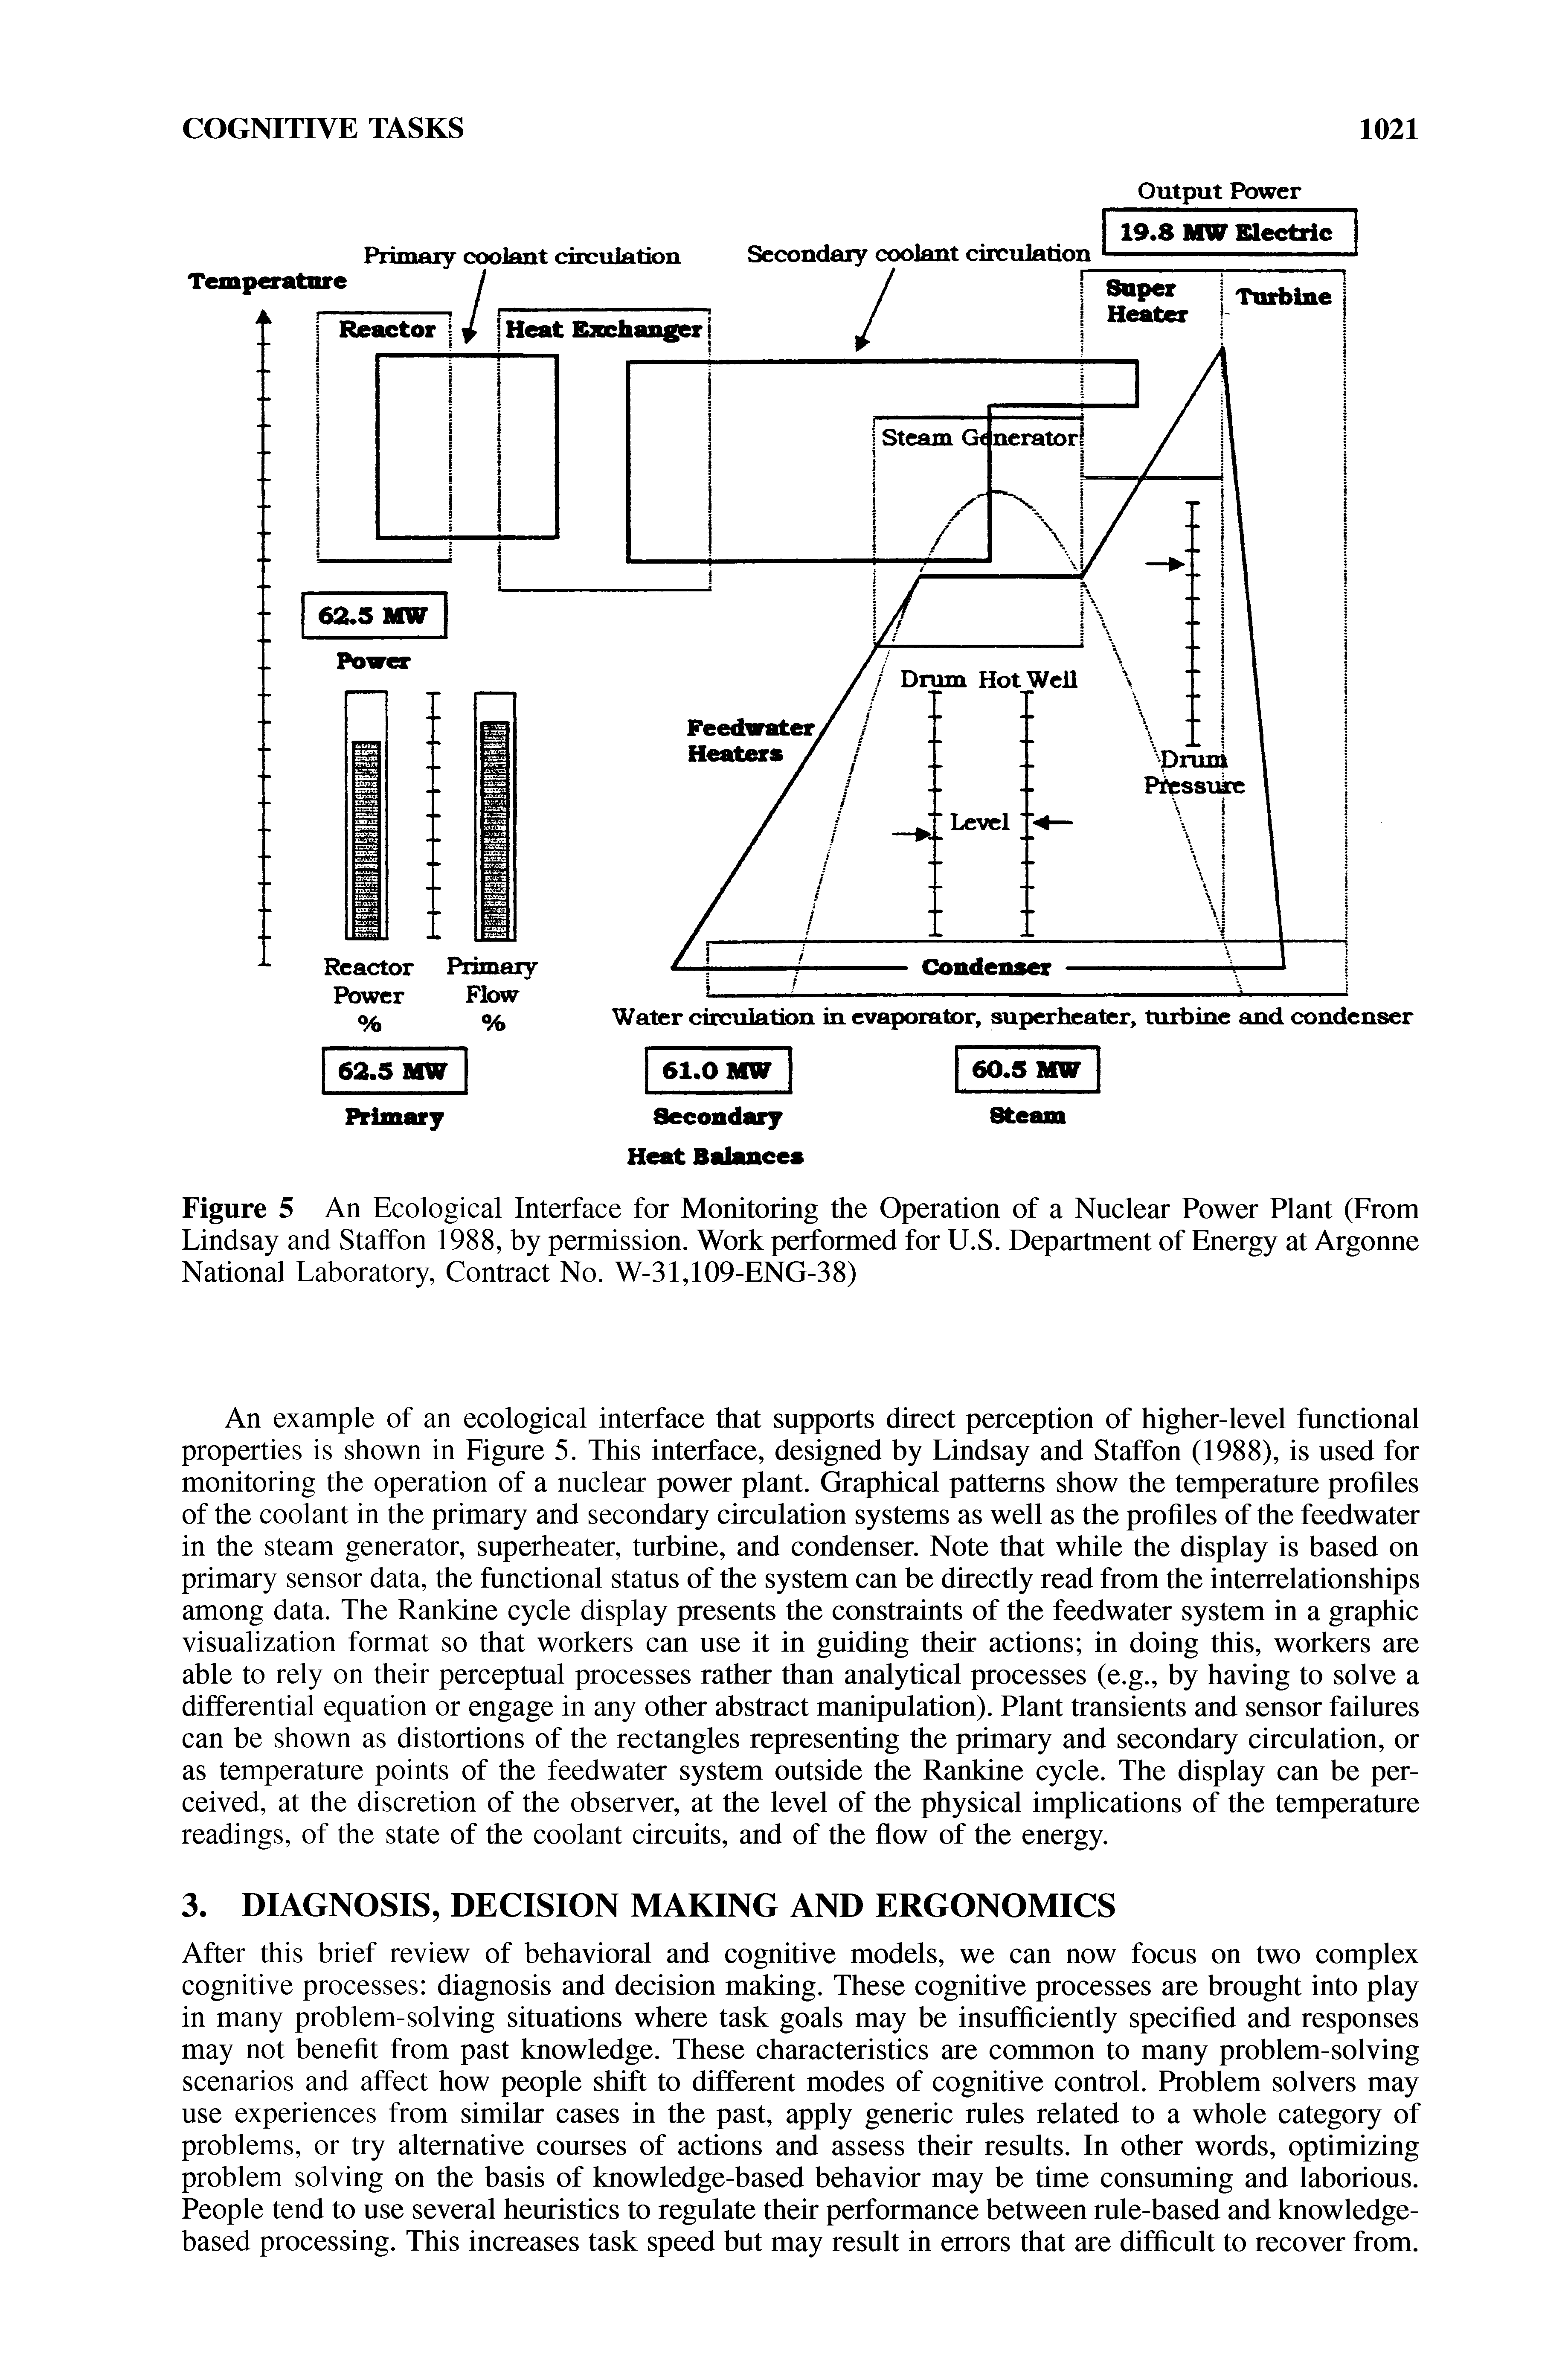 Figure 5 An Ecological Interface for Monitoring the Operation of a Nuclear Power Plant (From Lindsay and Staffon 1988, by permission. Work performed for U.S. Department of Energy at Argonne National Laboratory, Contract No. W-31,109-ENG-38)...